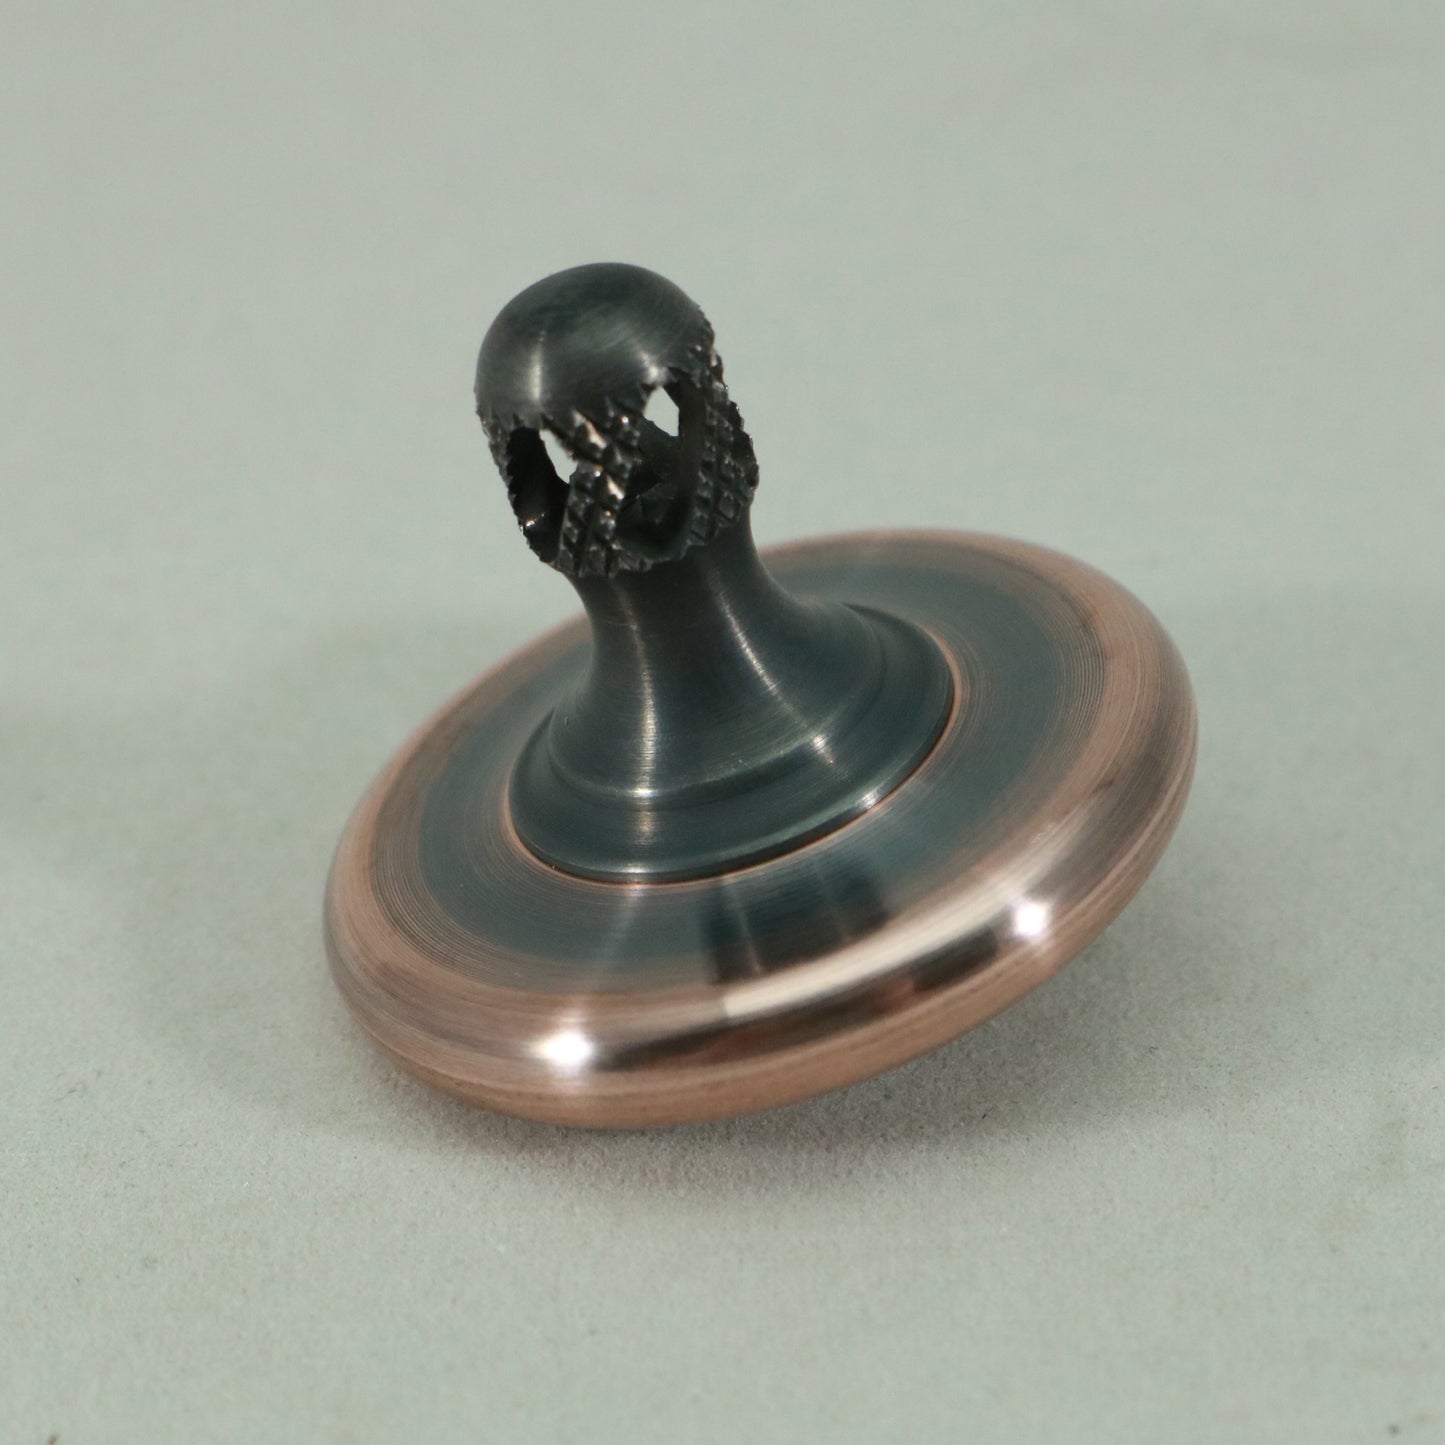 M3 - Antique Copper & Gunmetal Stainless Steel Spin Top SG